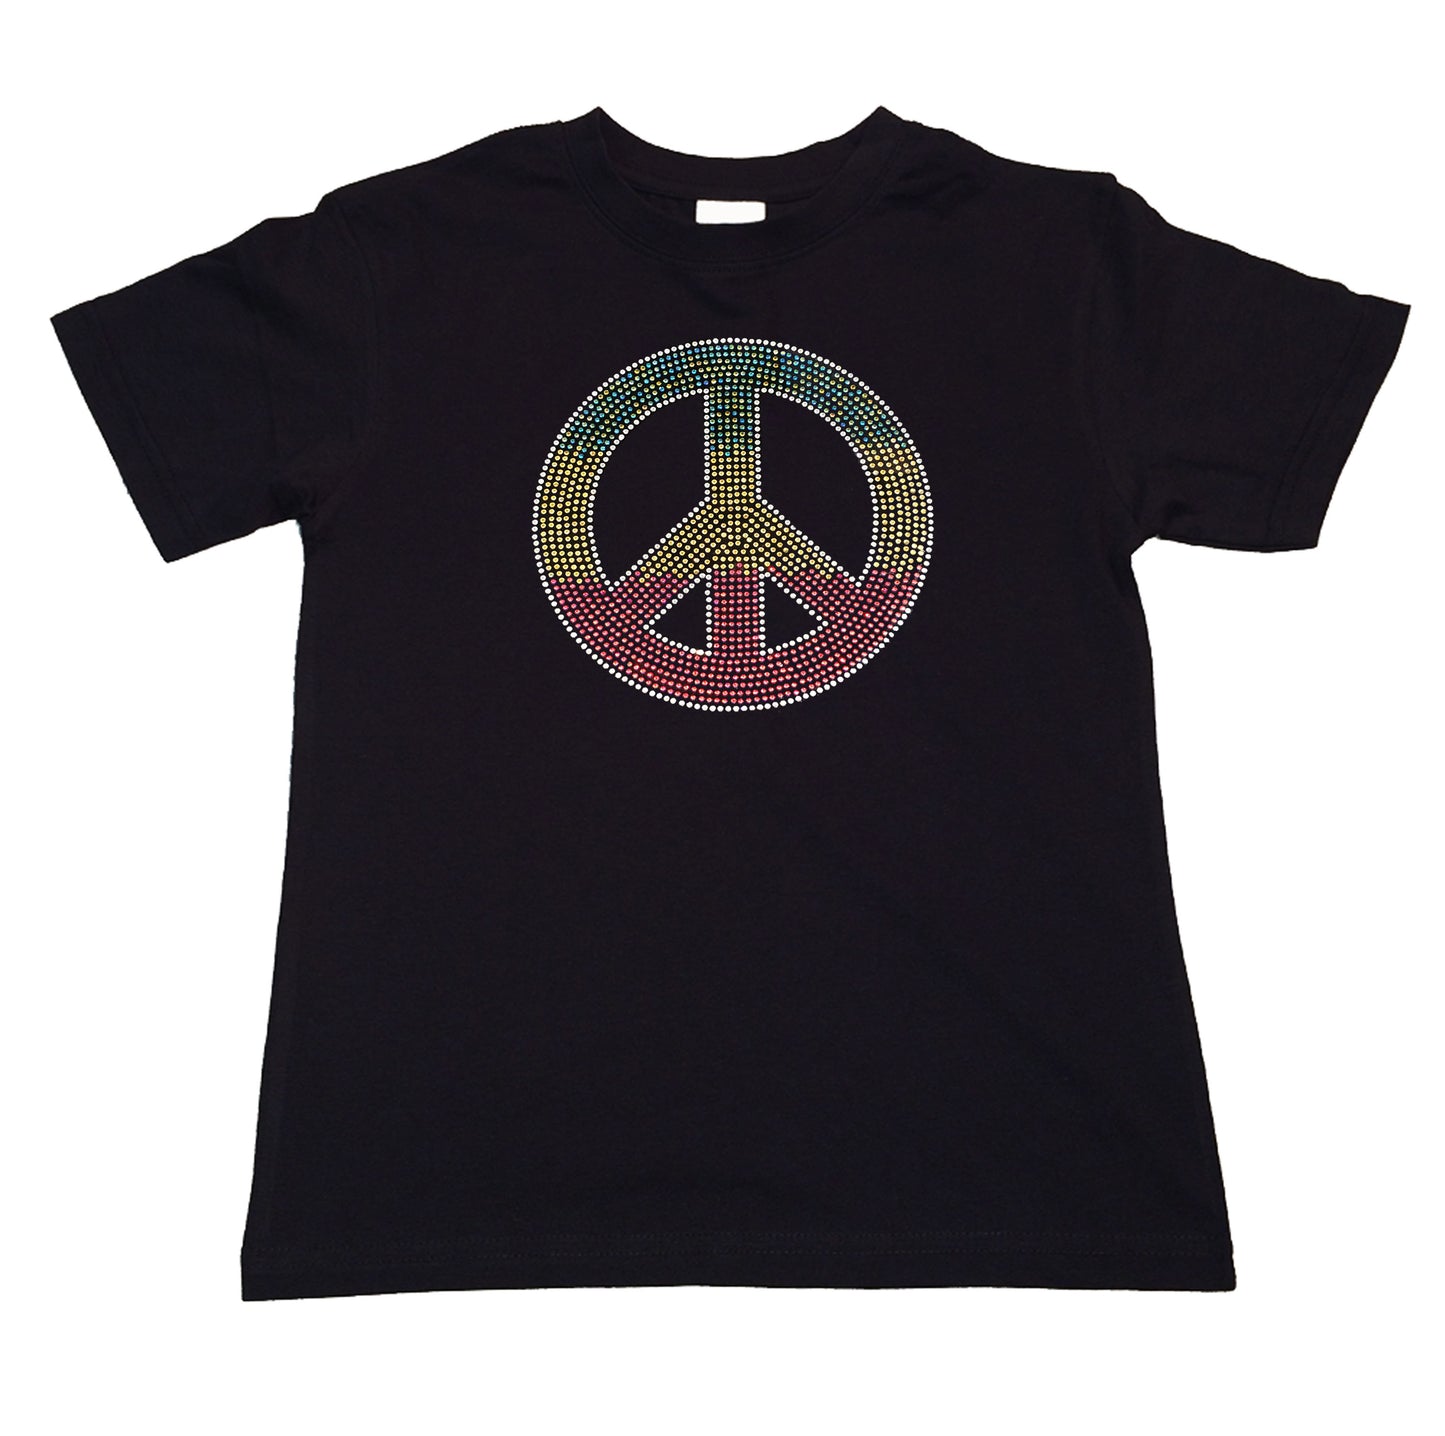 Girls Rhinestone T-Shirt " Colorful Peace Sign in Rhinestones " Kids Size 3 to 14 Available